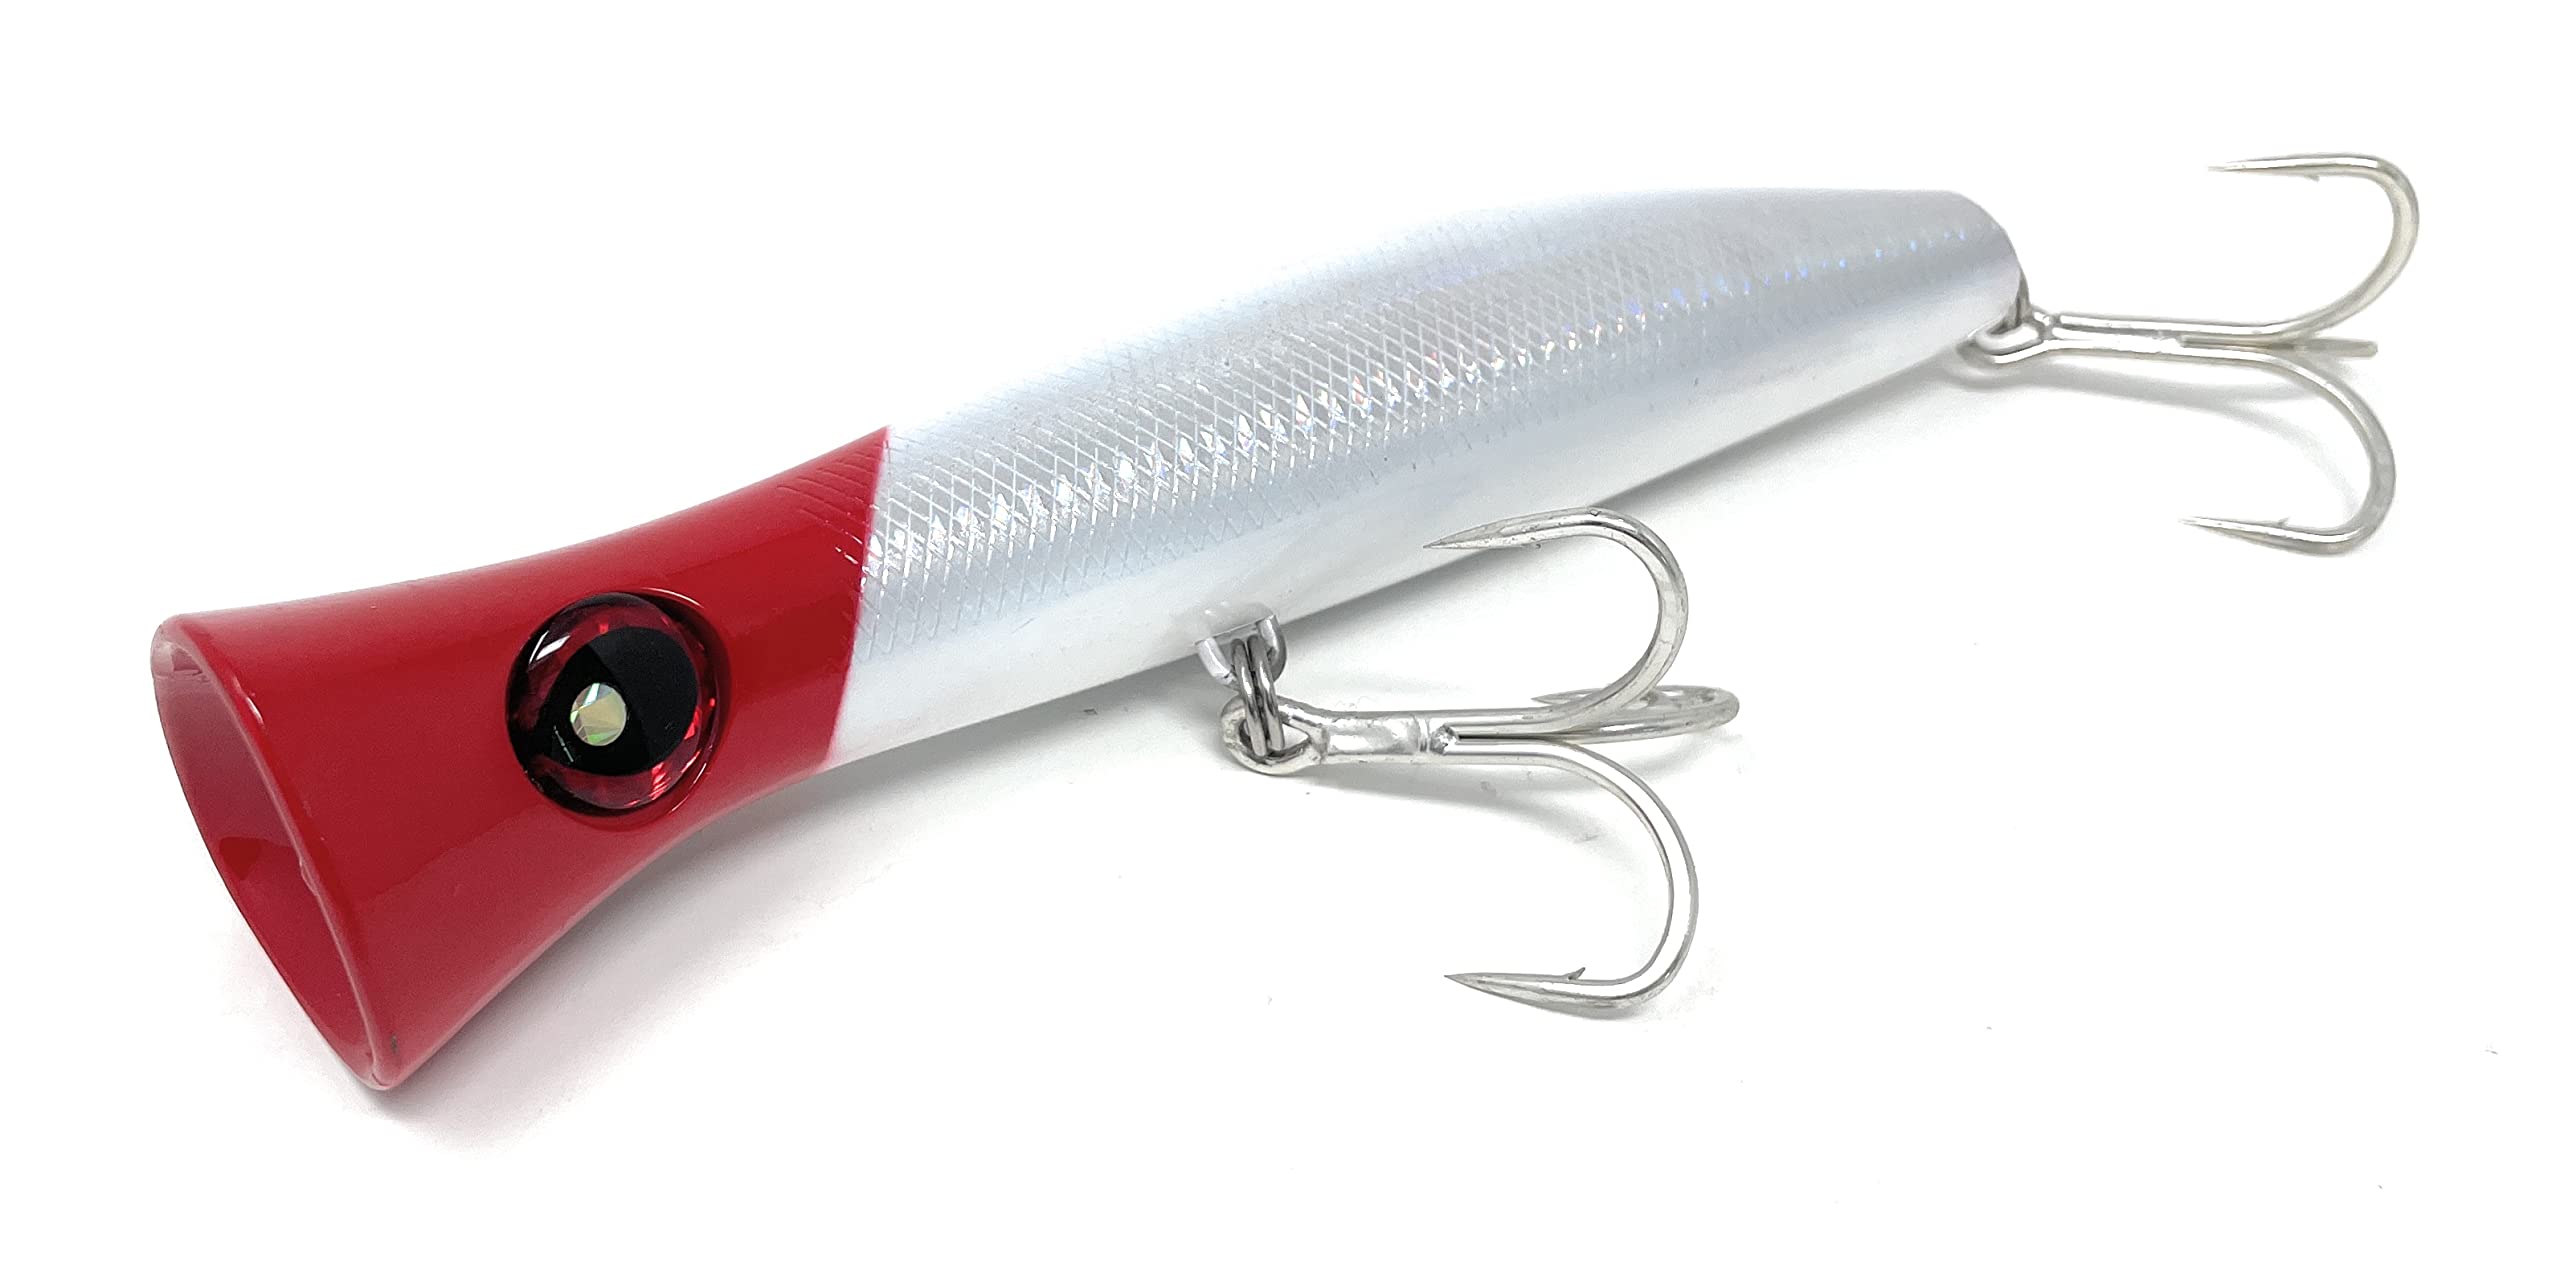 Mylar Parachute Lures by Bloody Point Baits and Rockfish fishing